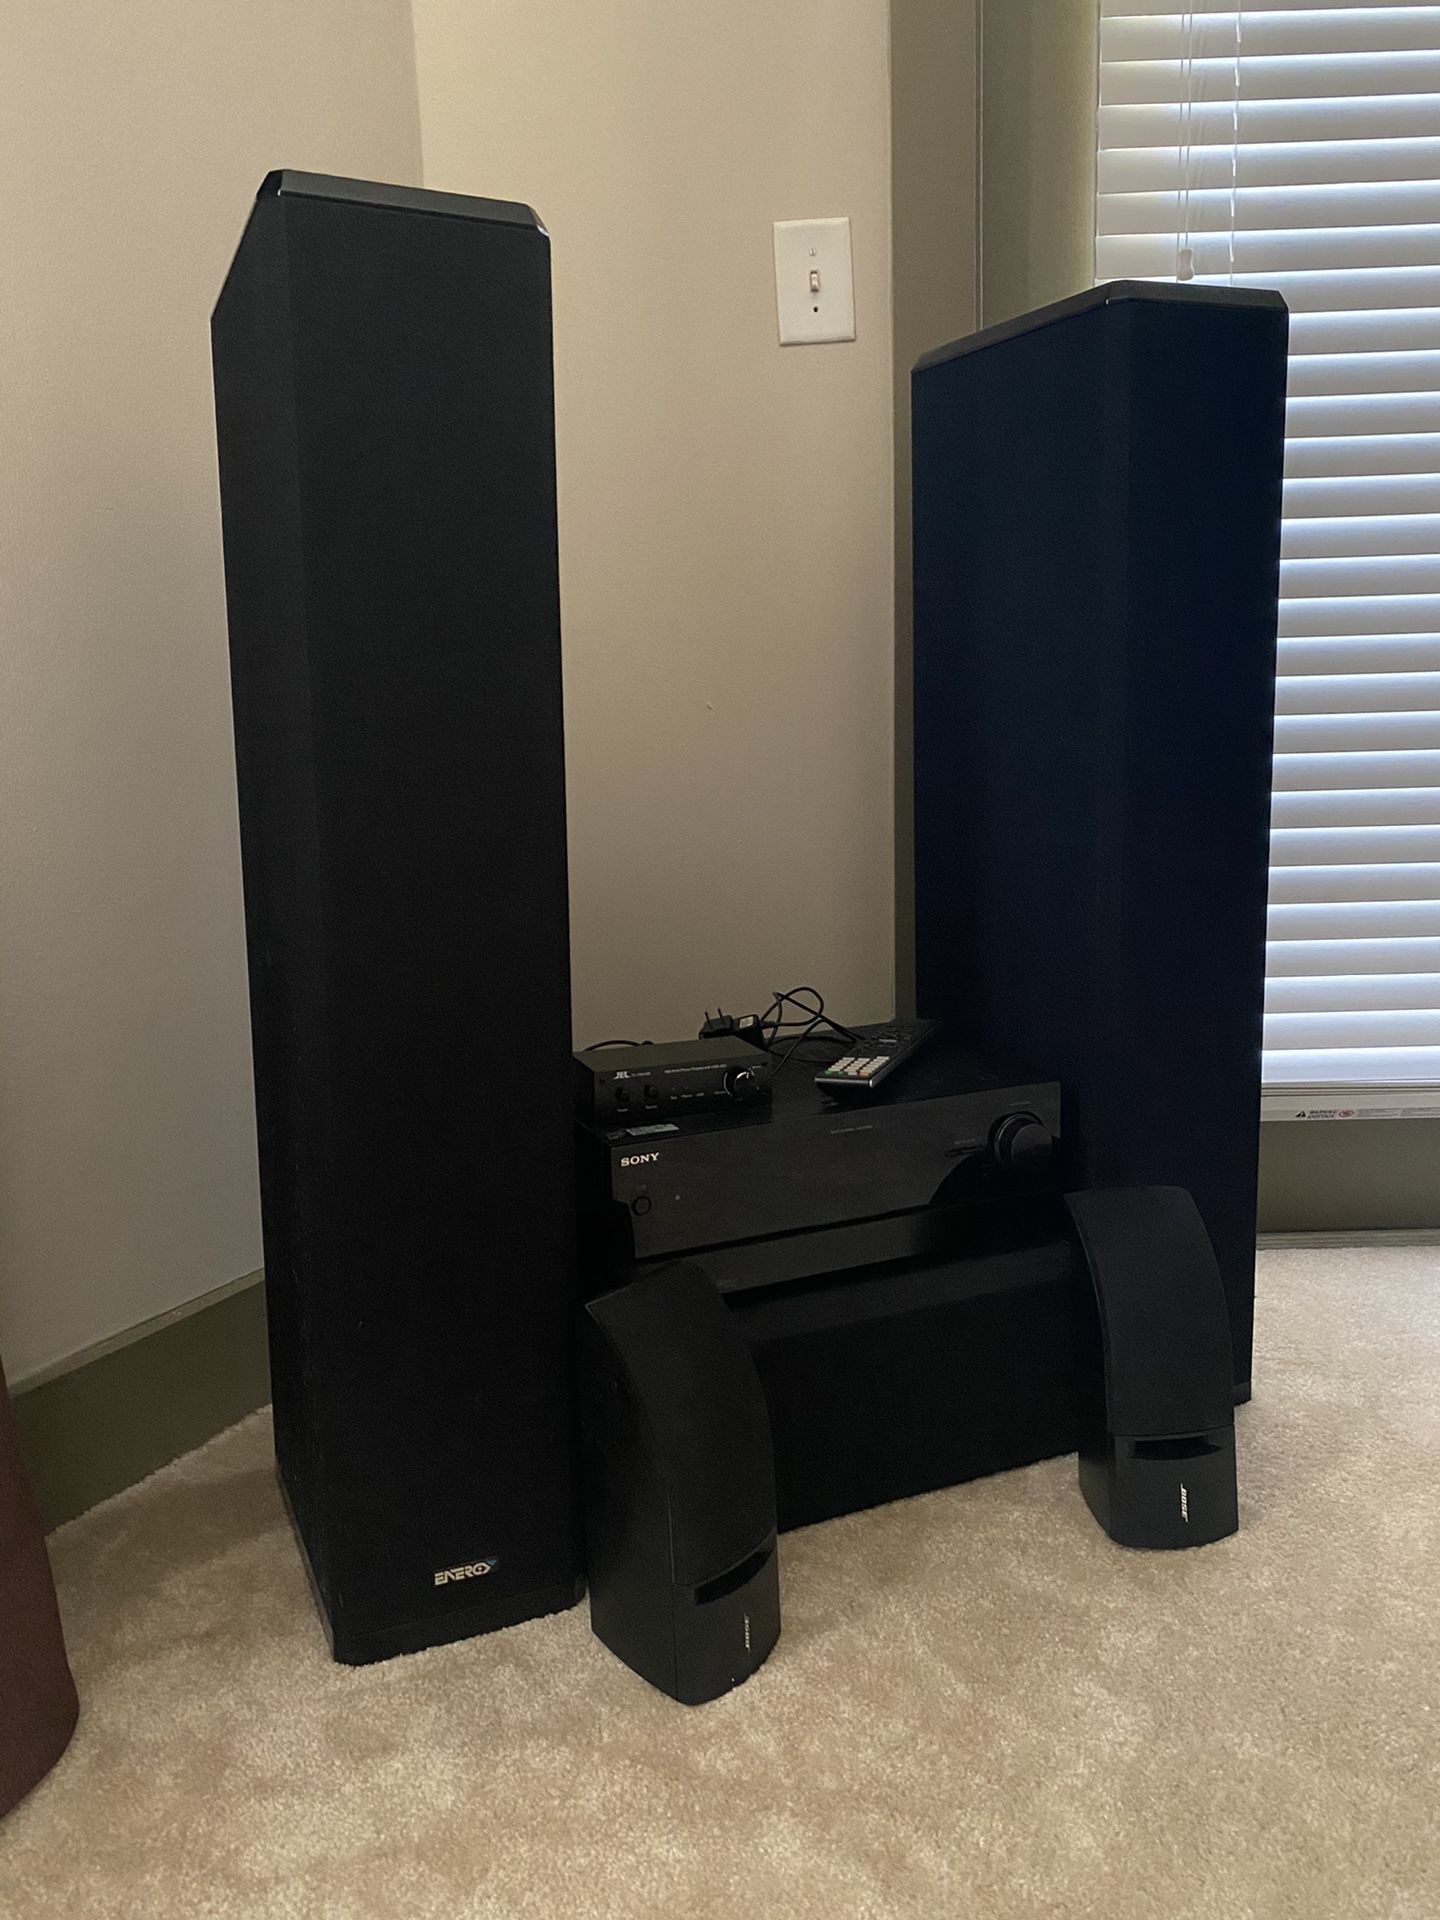 Sony Home Theatre System with Channel Changer, Energy Home Theatre Speakers, and Bose Surround Sound Wall Speakers (wires, wall mount and screws incl